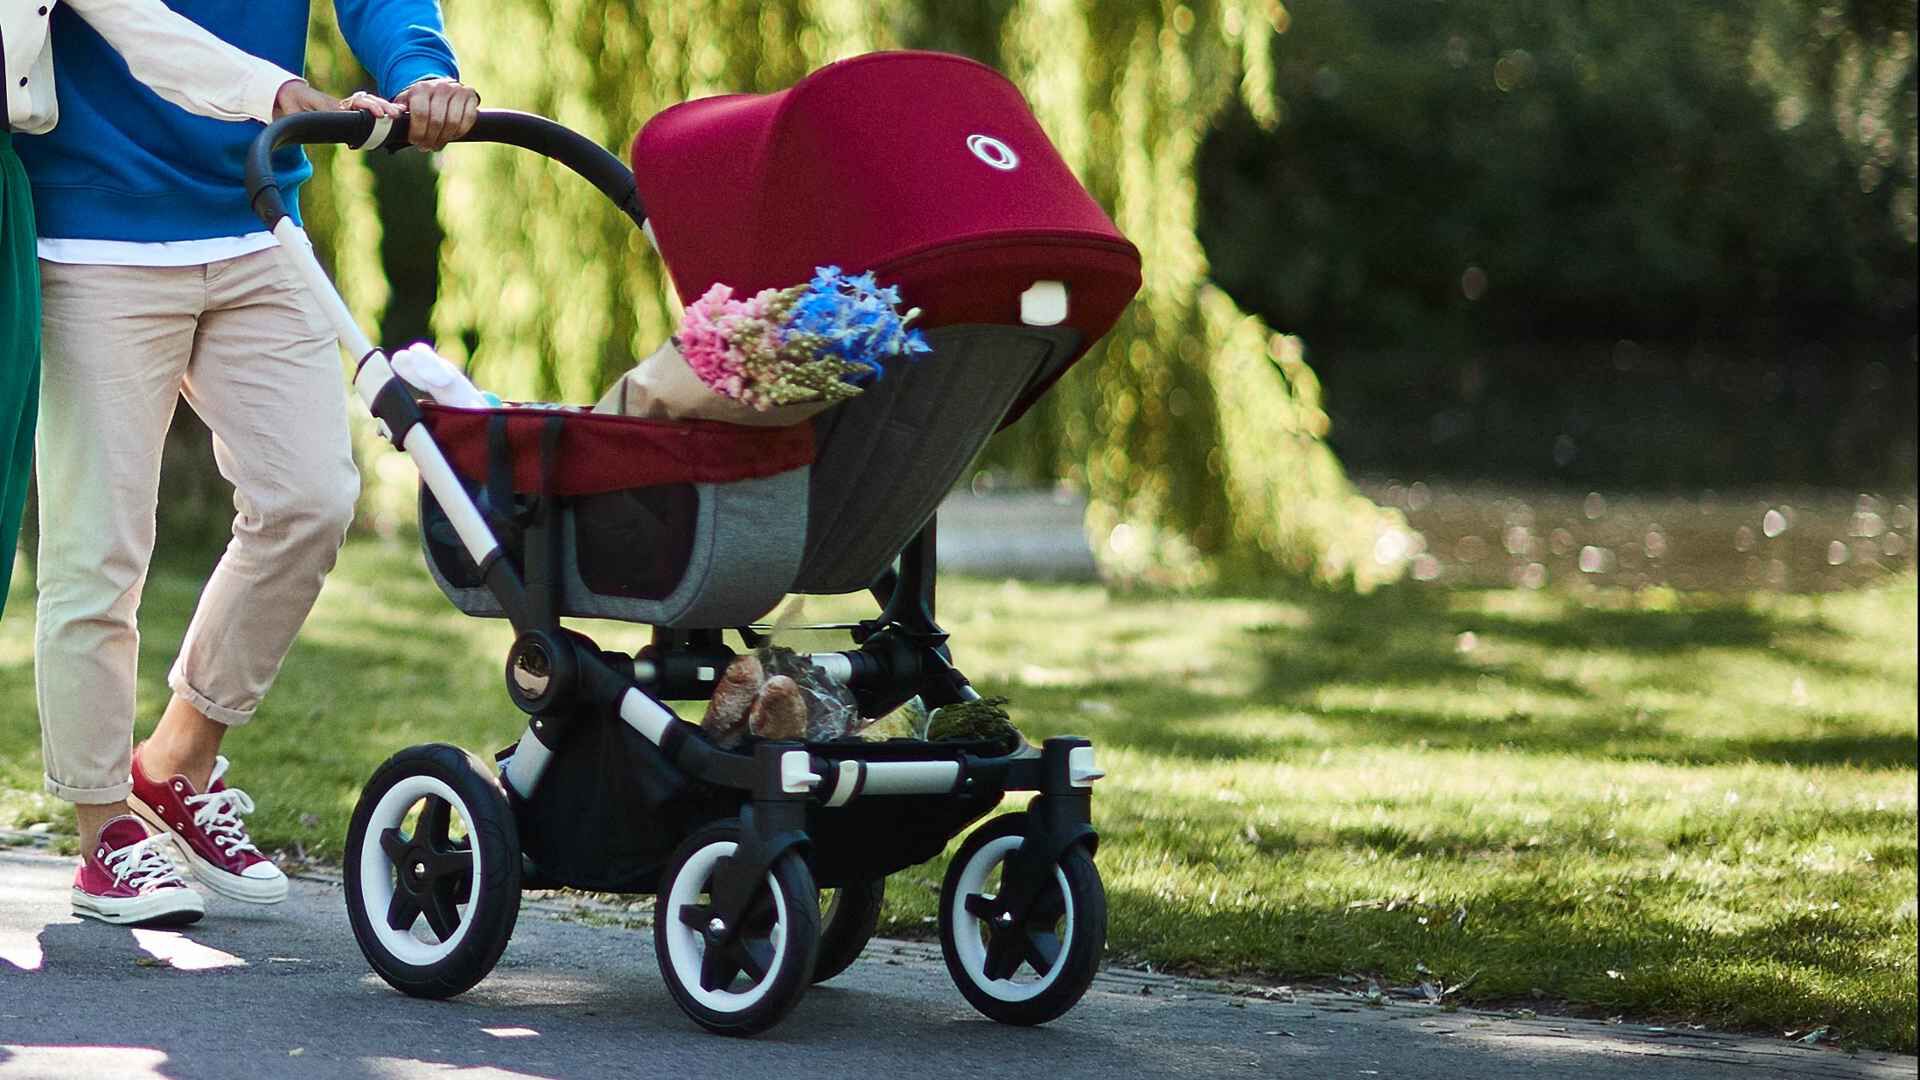 bugaboo ruby red